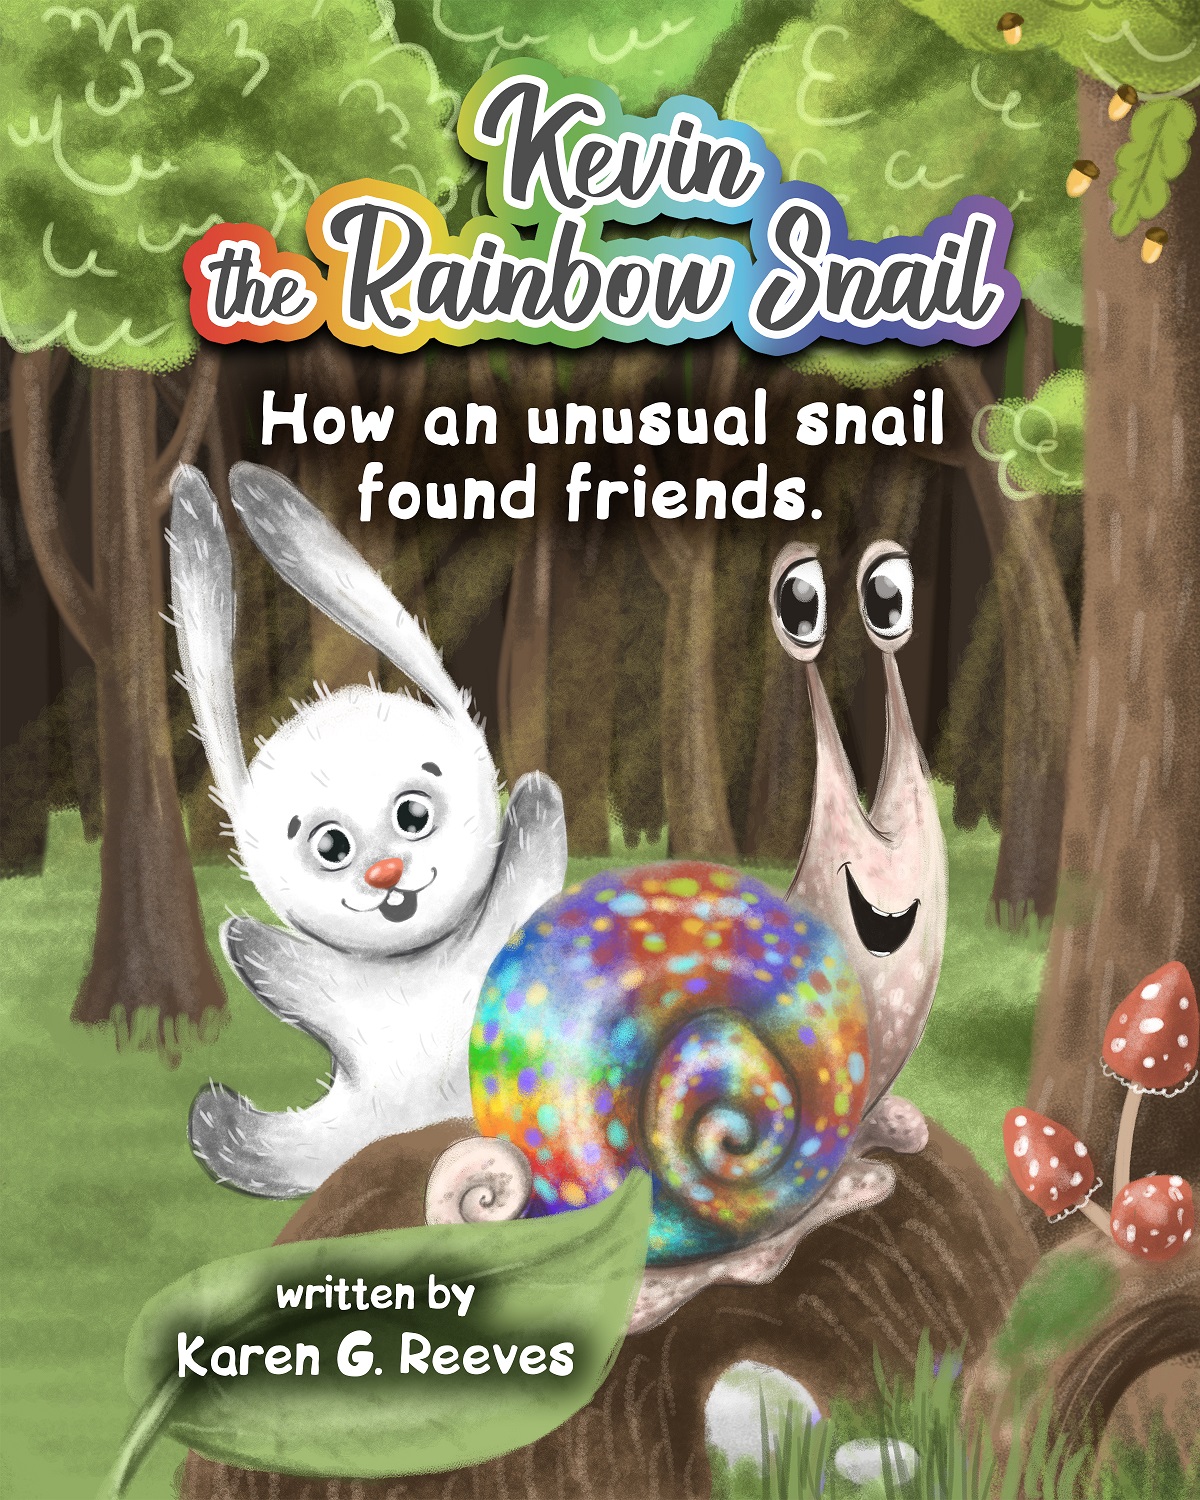 FREE: Kevin the Rainbow Snail: How an Unusual Snail Found Friends by Karen G. Reeves